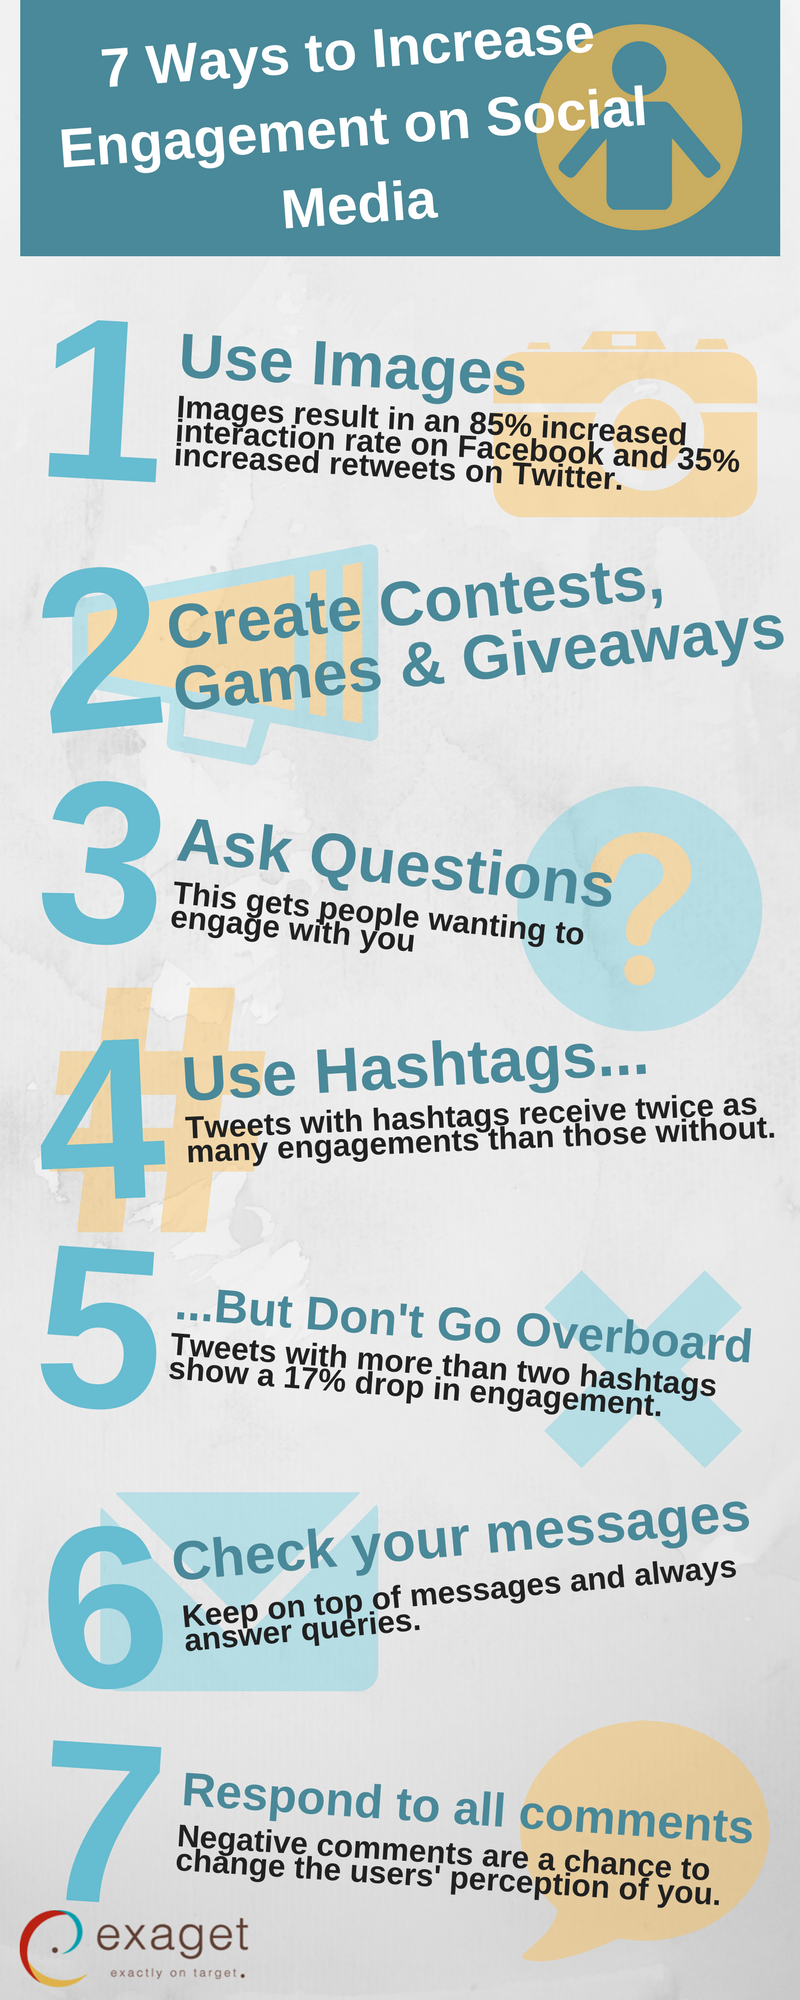 Try These 7 Ways To Increase Social Media Engagement Infographic Exaget 